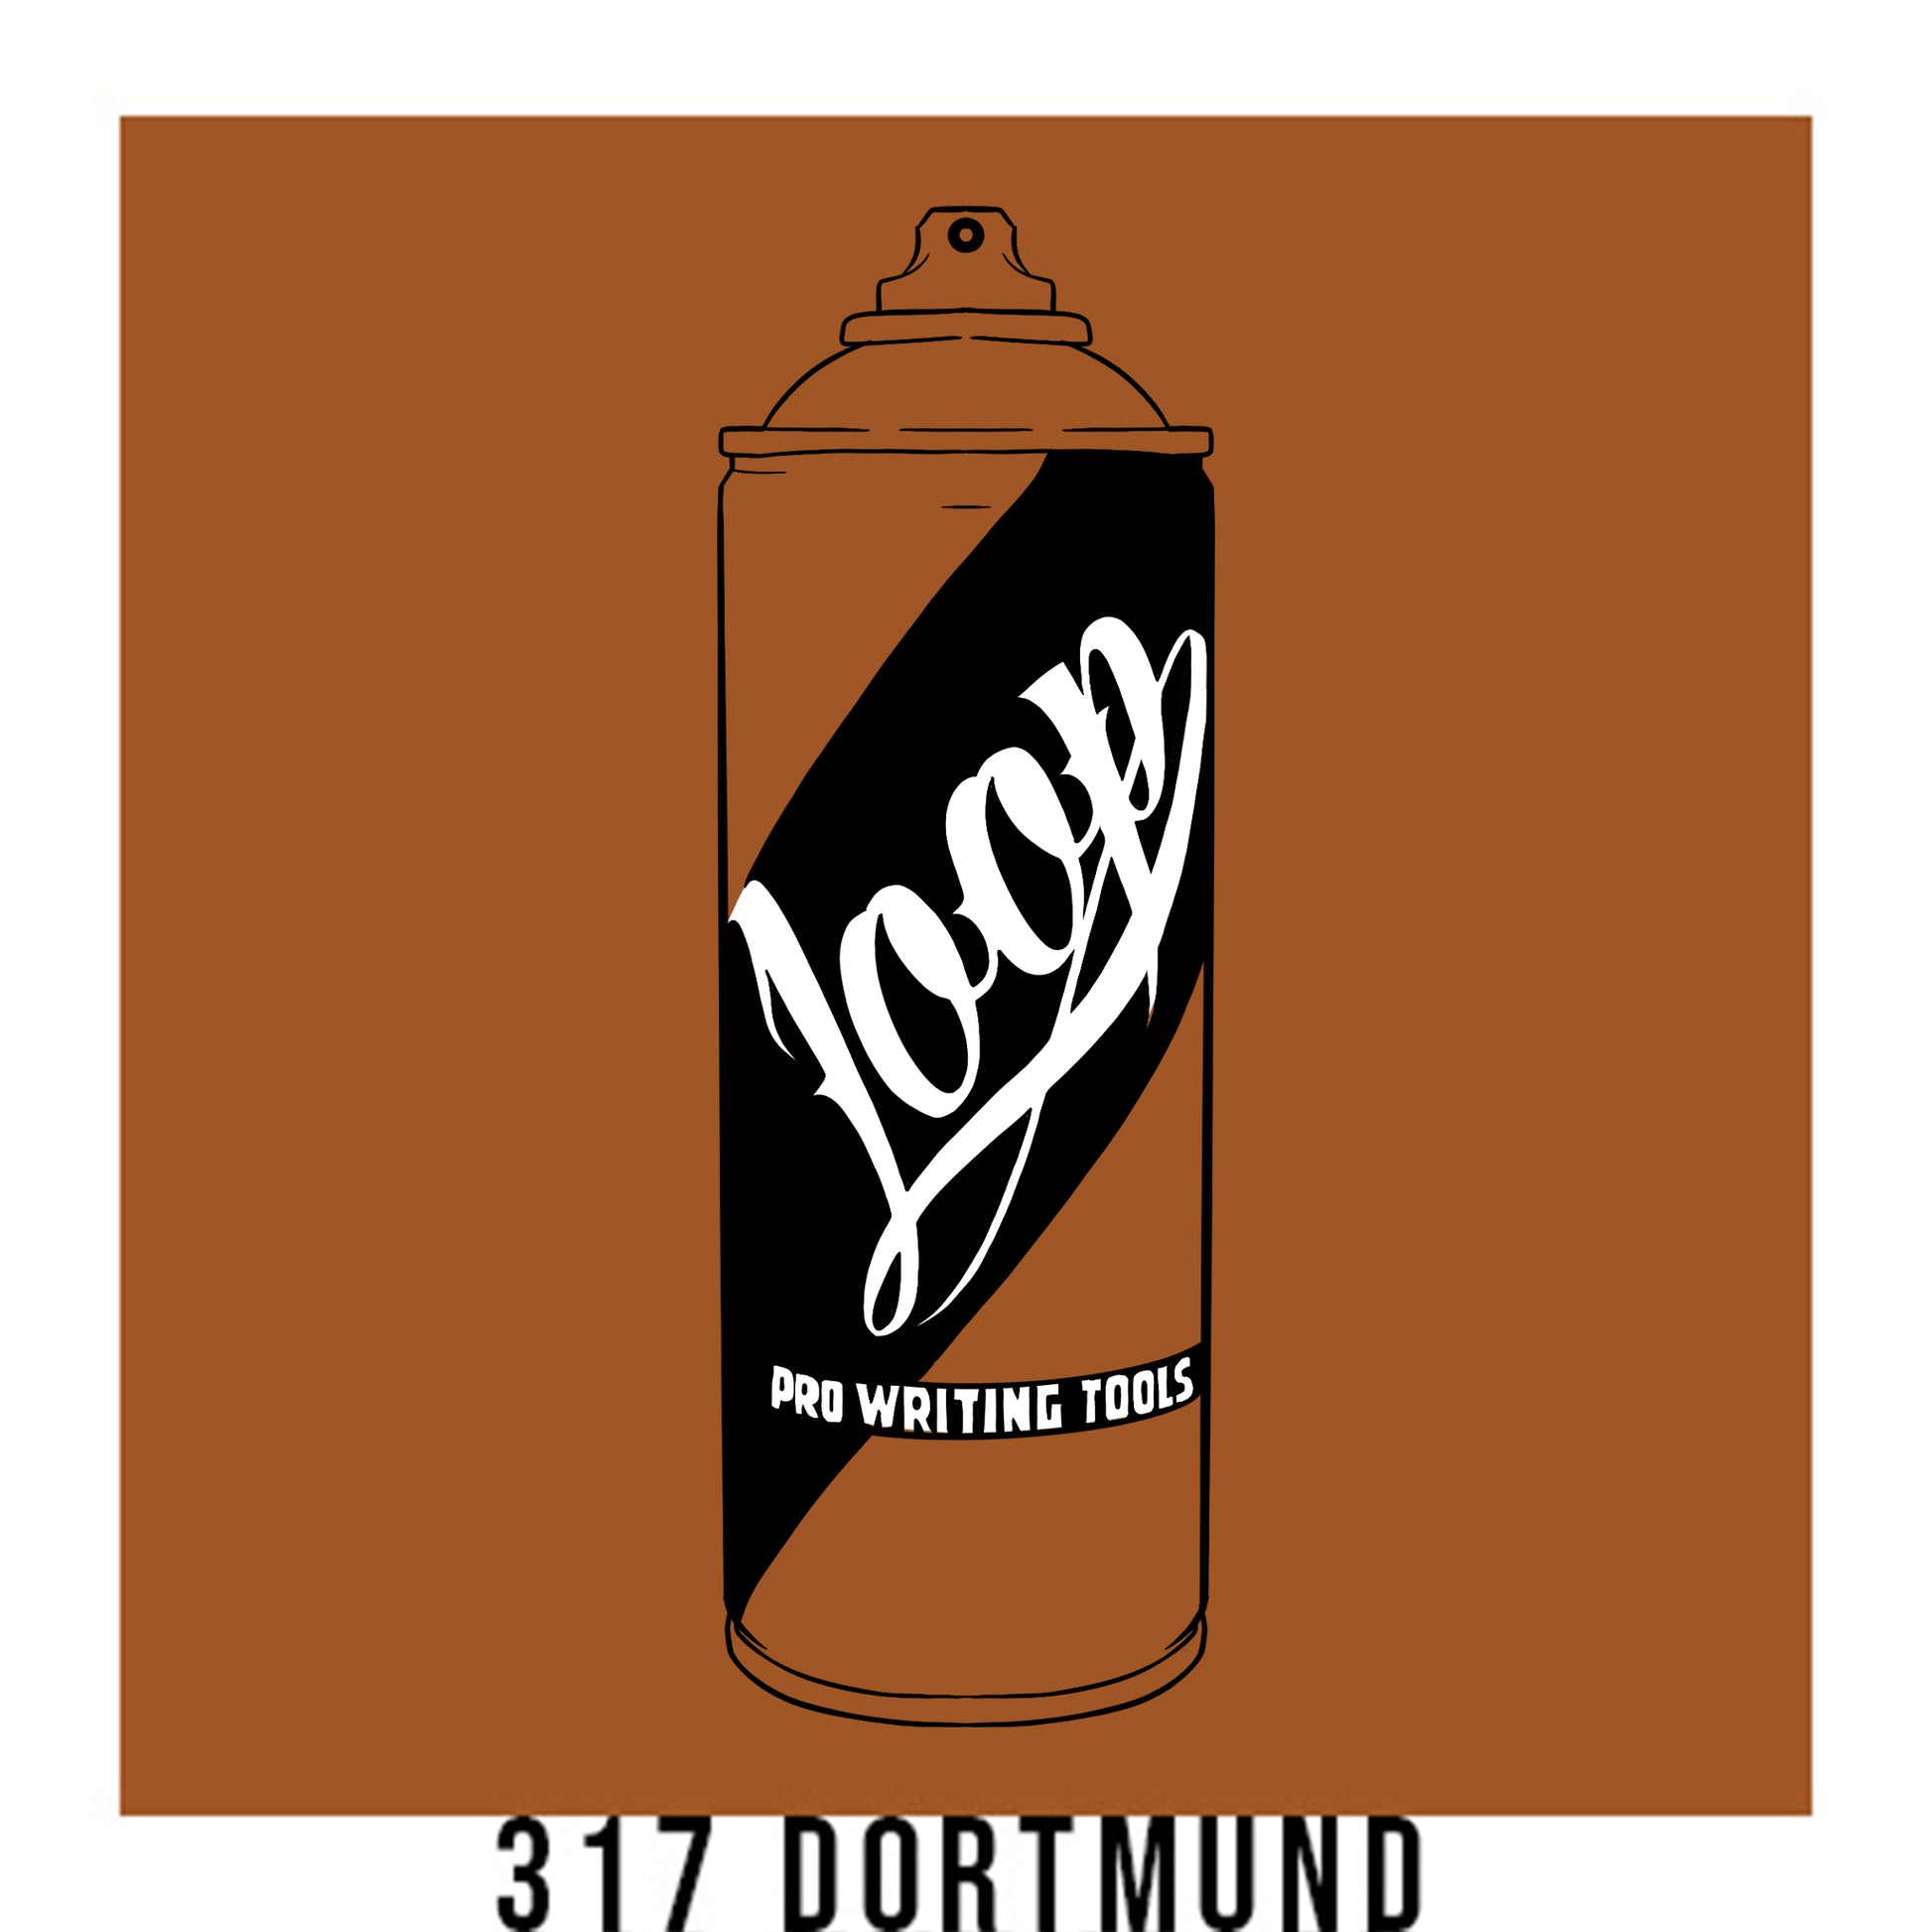 A black outline drawing of a cinnamon brown spray paint can with the word "Loop" written on the face in script. The background is a color swatch of the same cinnamon brown with a white border with the words "317 Dortmund" at the bottom.